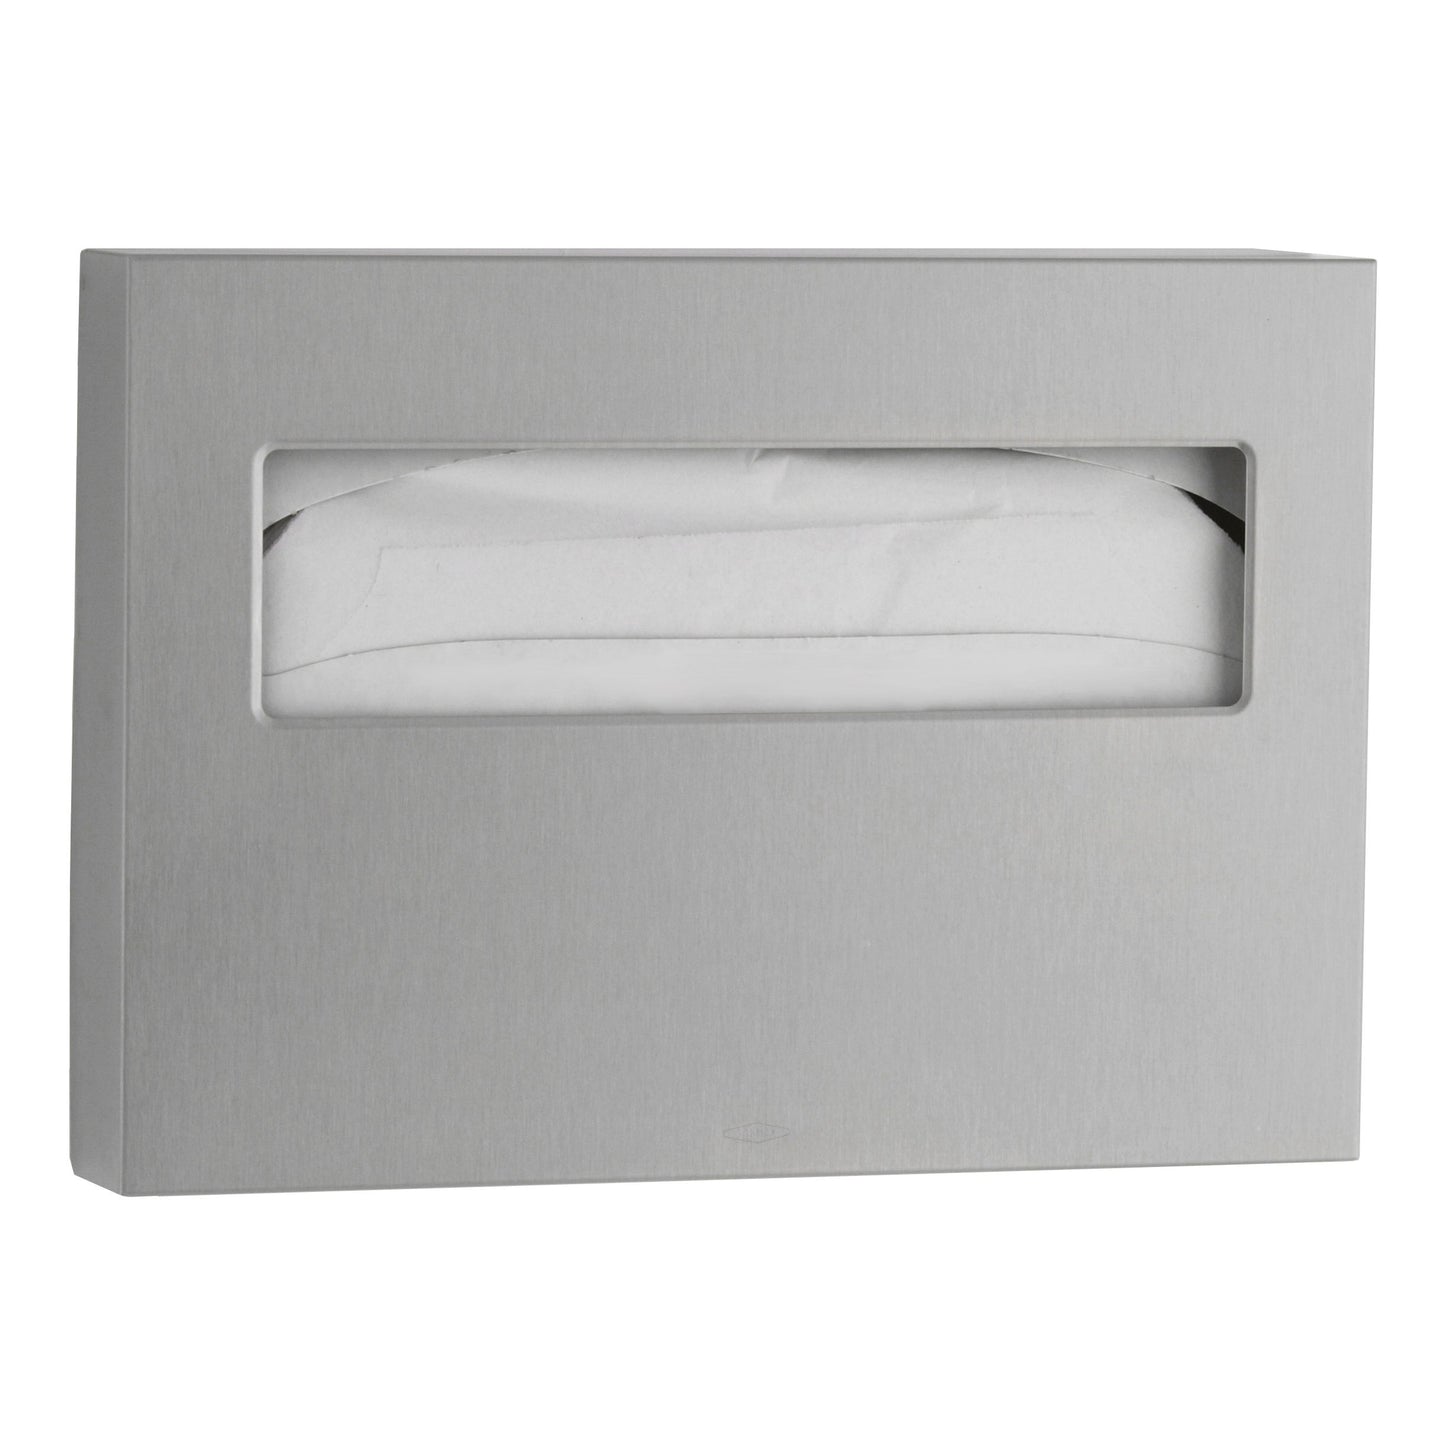 Bobrick 221 - Surface Mounted Toilet Seat Cover Dispenser in Satin Stainless Steel